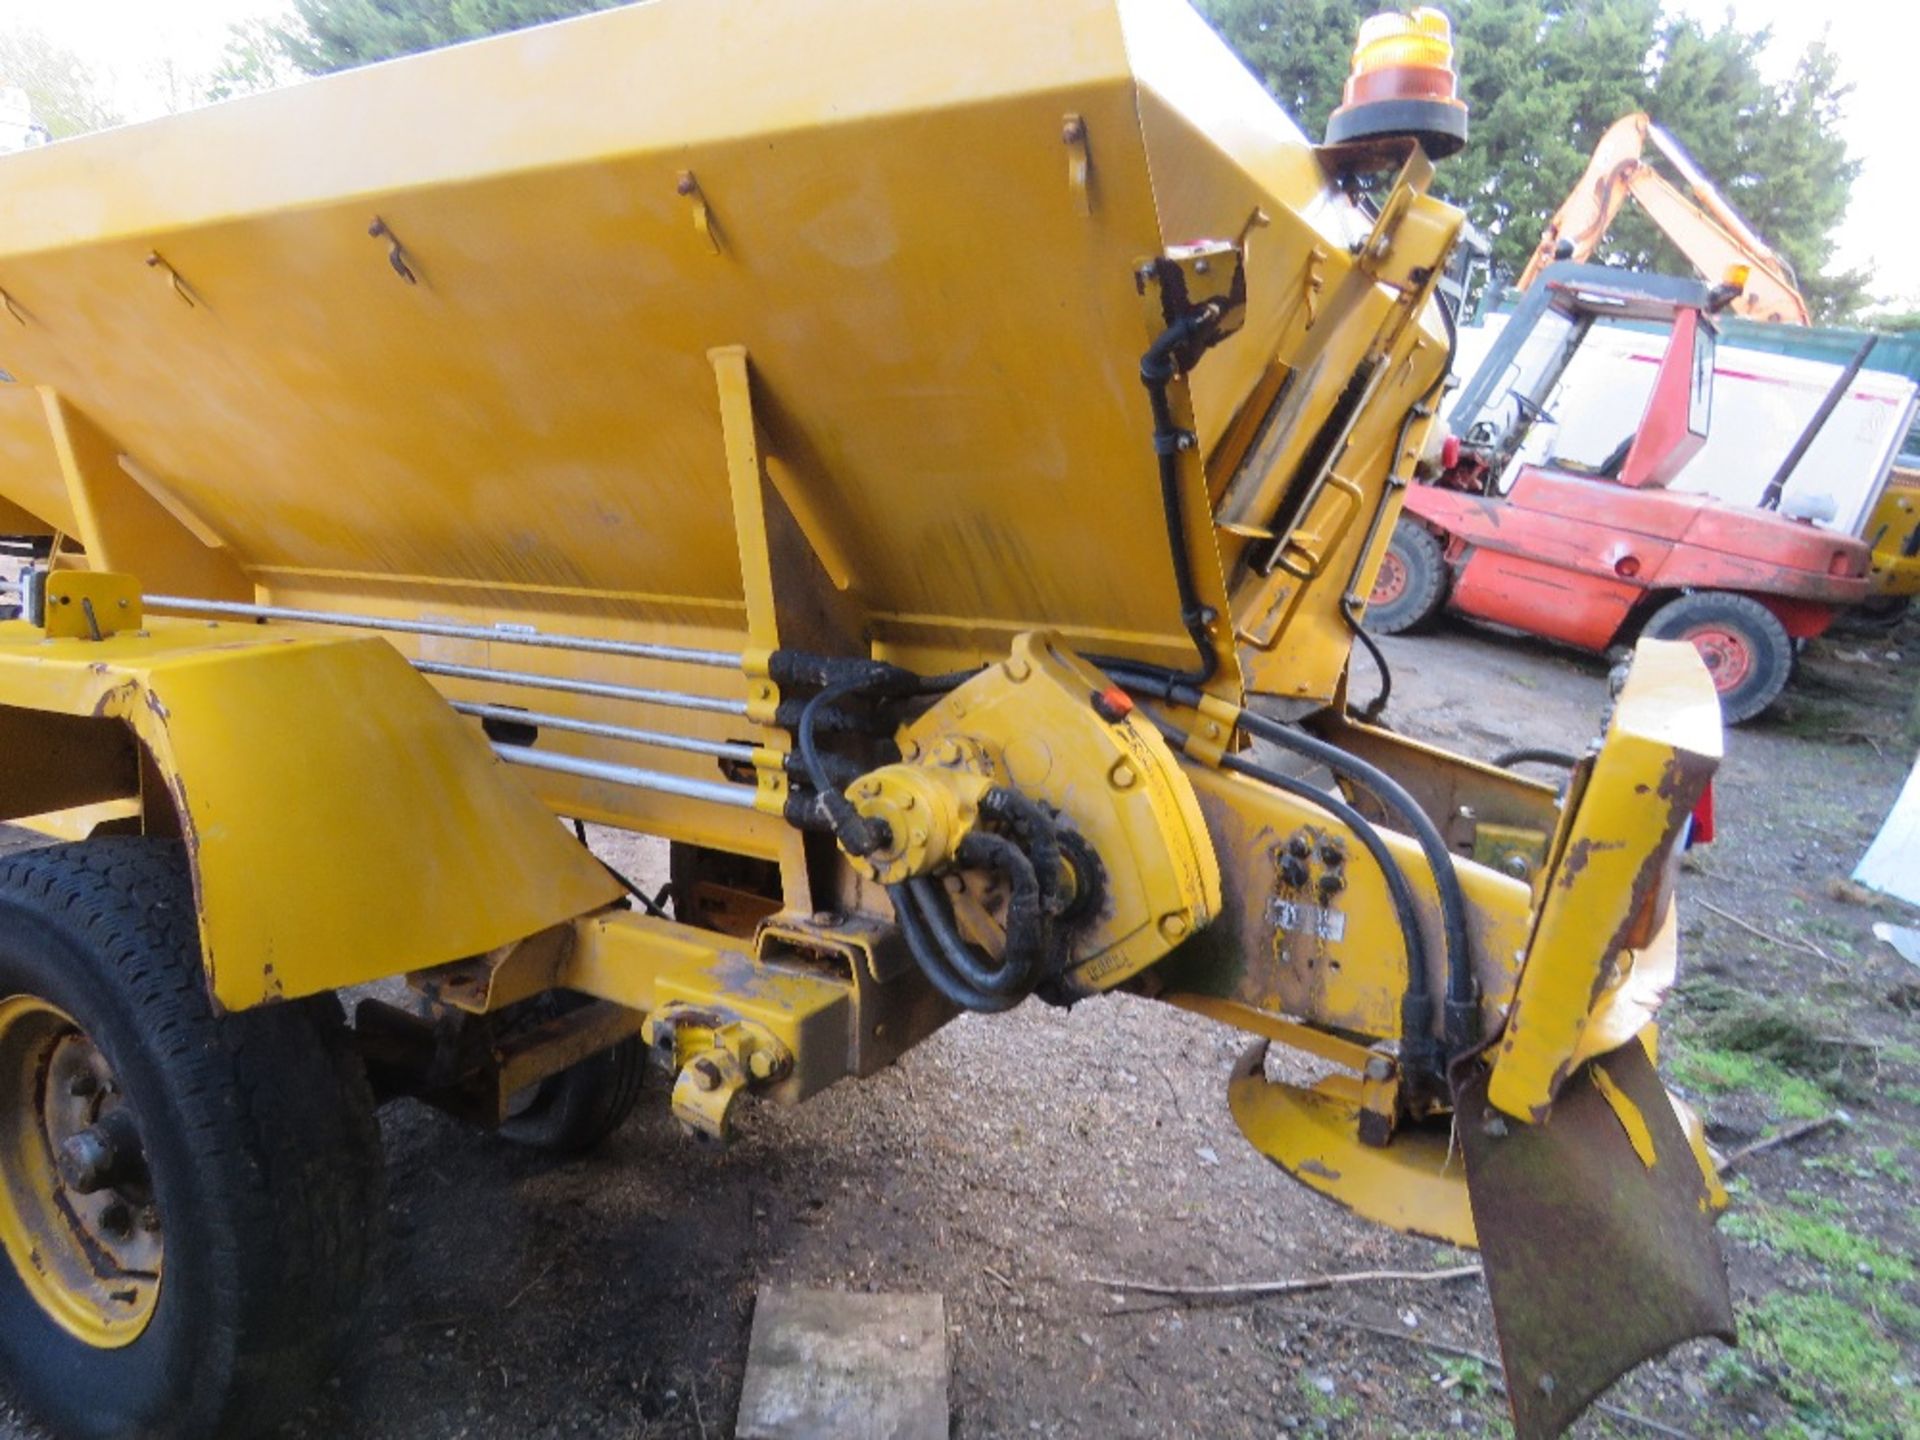 CHARITY LOT!! ECON SINGLE AXLED TOWED SALT SPREADER WITH WHEEL DRIVEN HYDRAULIC SYSTEM. UNUSED FOR - Image 9 of 13